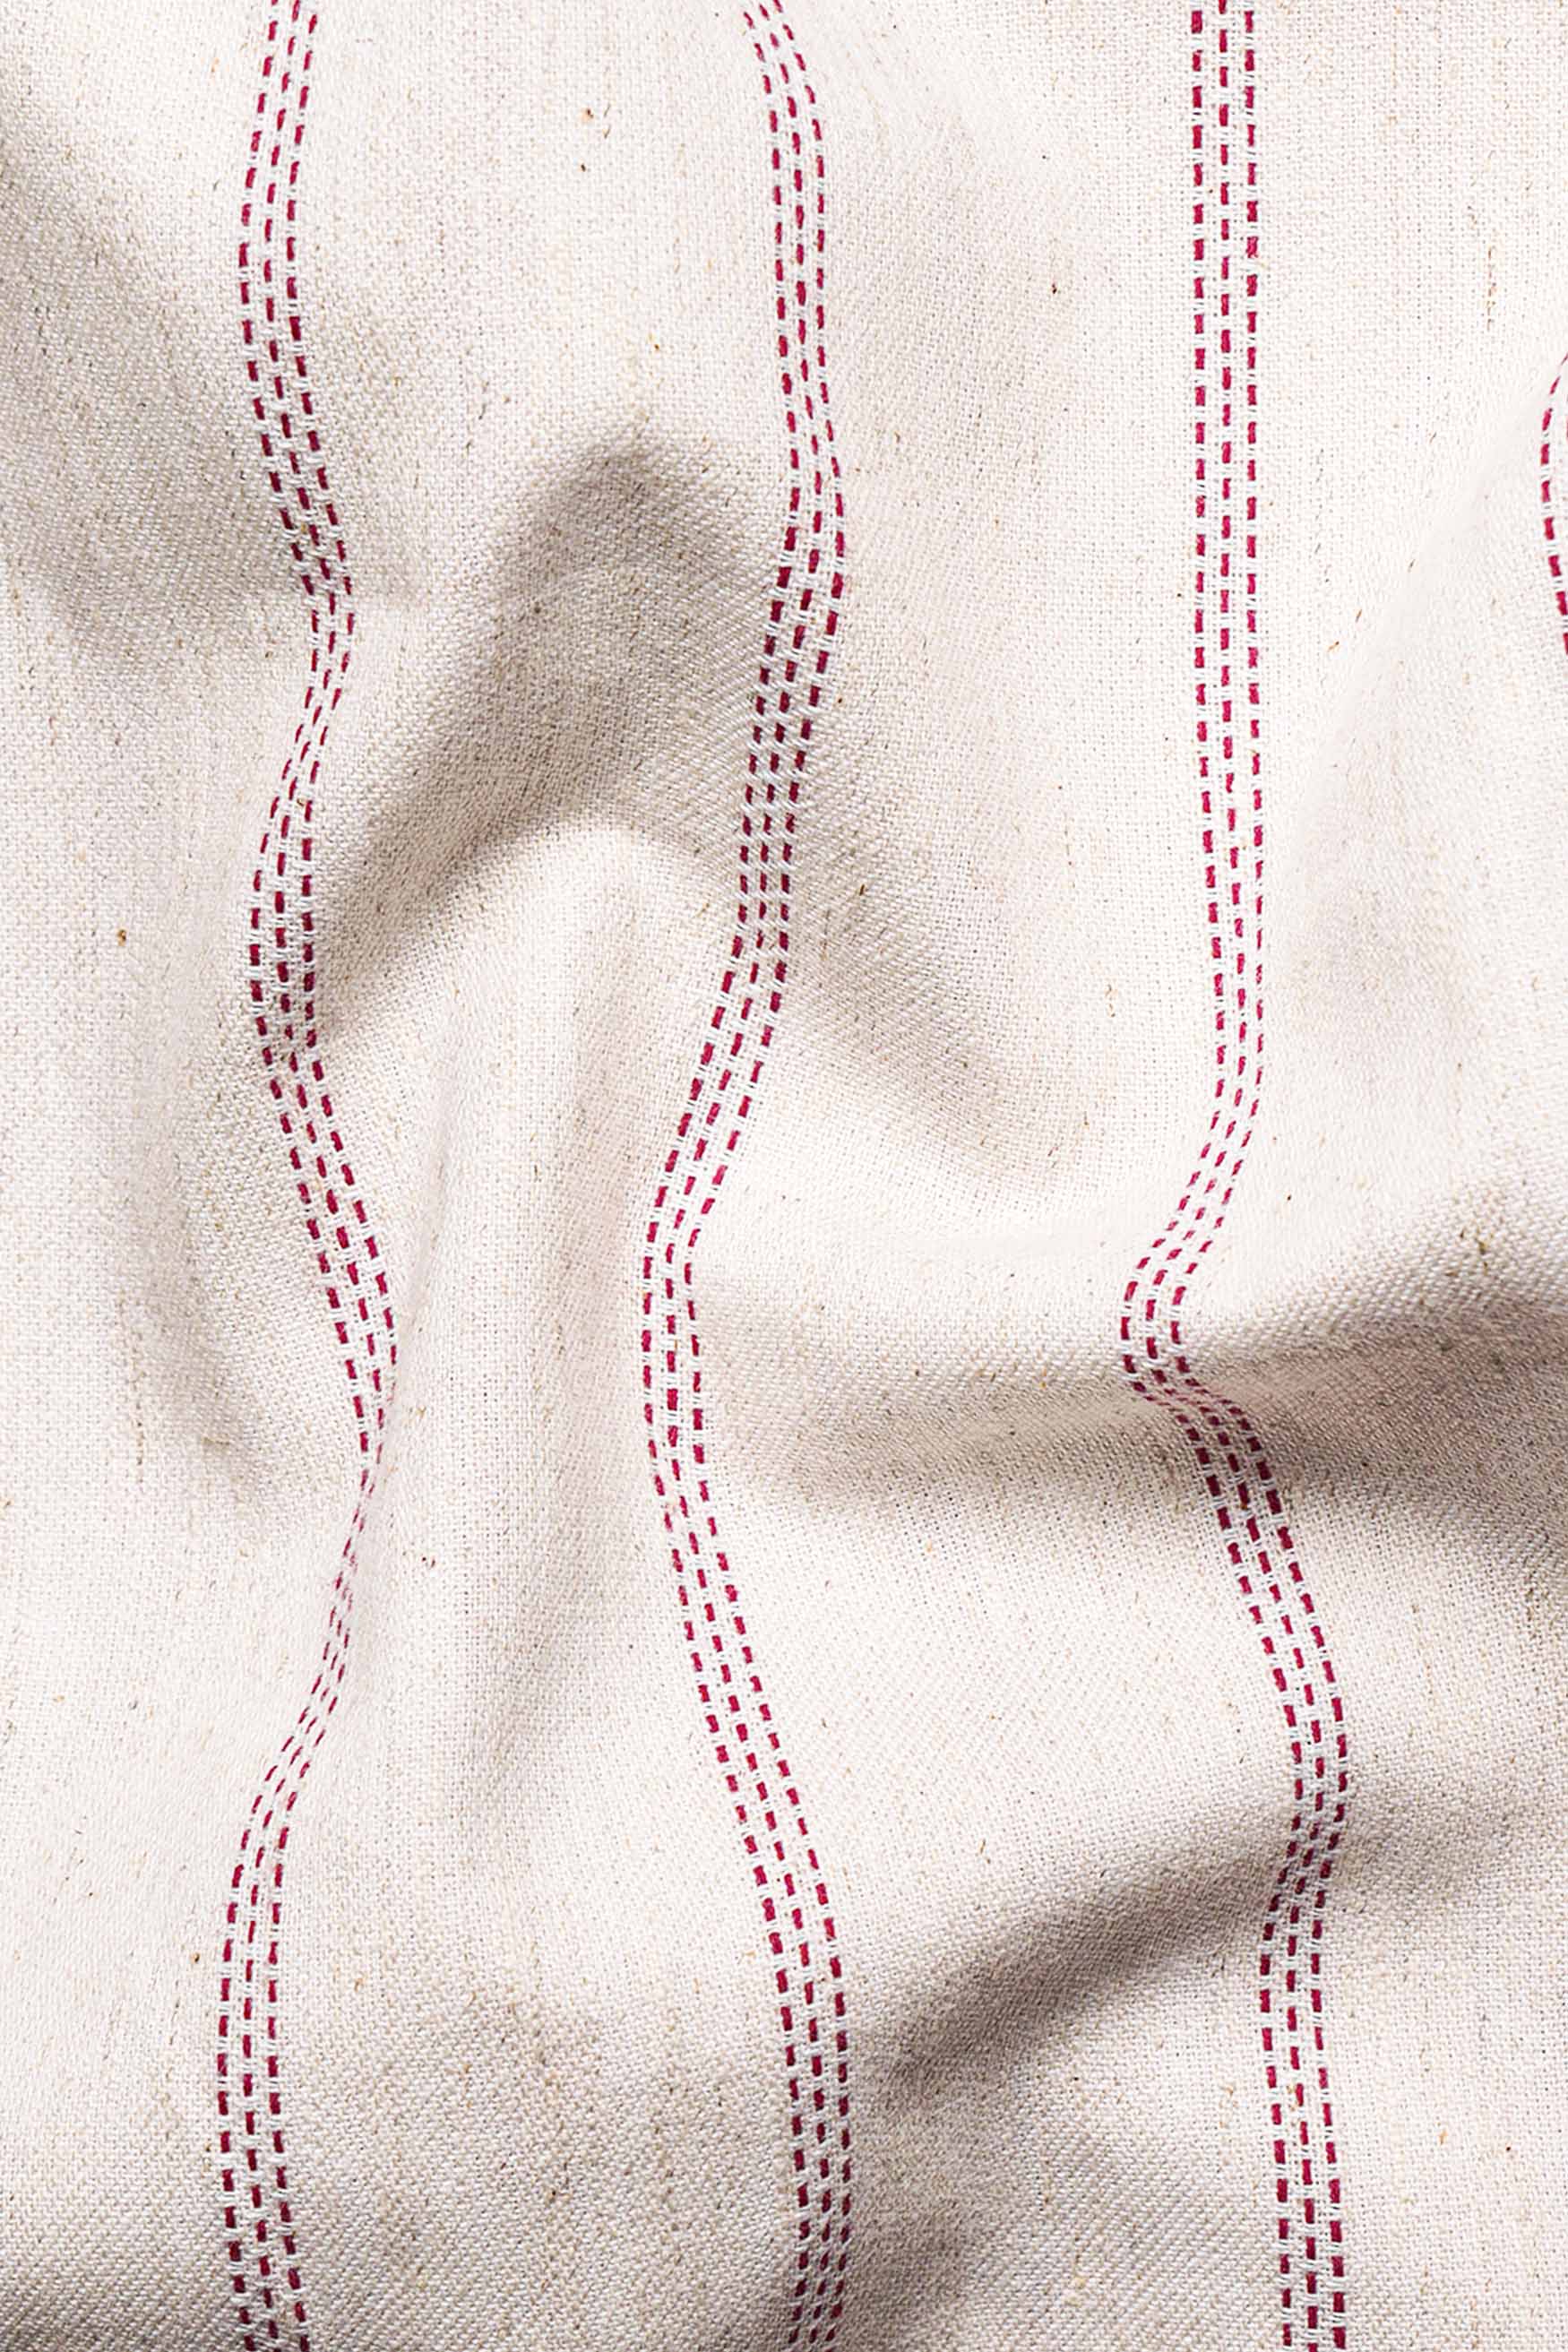 Parchment Beige with Cerise Red Striped Funky Embroidered Luxurious Linen Kurta Shirt 5268-KS-E185-38, 5268-KS-E185-H-38, 5268-KS-E185-39, 5268-KS-E185-H-39, 5268-KS-E185-40, 5268-KS-E185-H-40, 5268-KS-E185-42, 5268-KS-E185-H-42, 5268-KS-E185-44, 5268-KS-E185-H-44, 5268-KS-E185-46, 5268-KS-E185-H-46, 5268-KS-E185-48, 5268-KS-E185-H-48, 5268-KS-E185-50, 5268-KS-E185-H-50, 5268-KS-E185-52, 5268-KS-E185-H-52